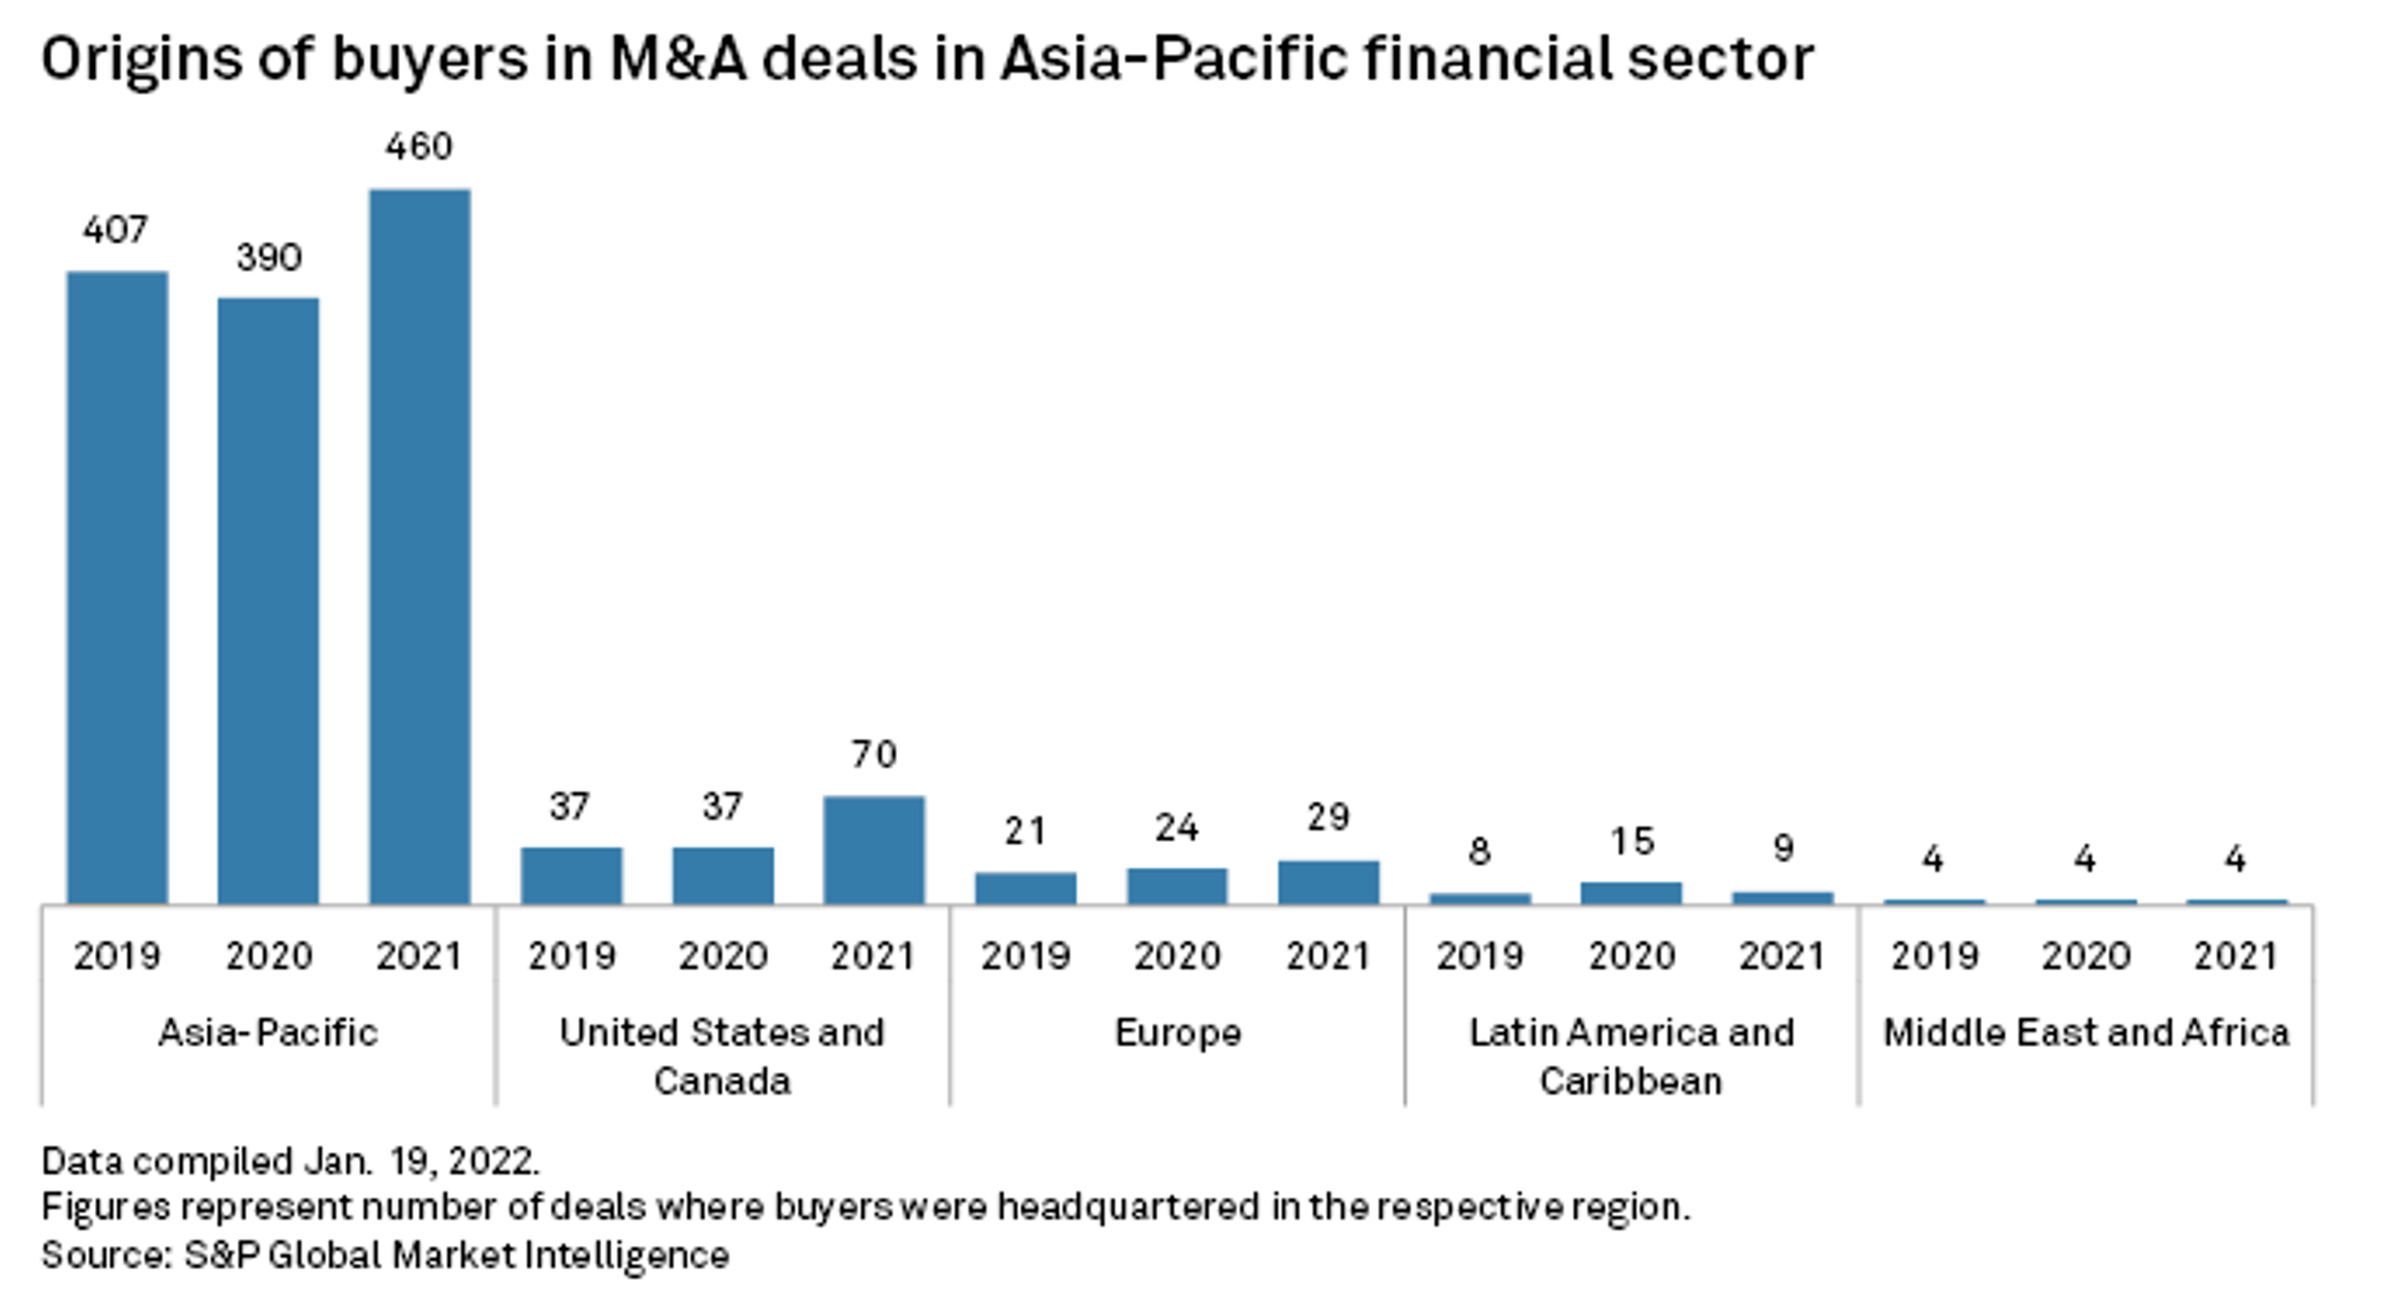 M&A Activity in the Asia-Pacific Region: Past, Present and a Look Forward